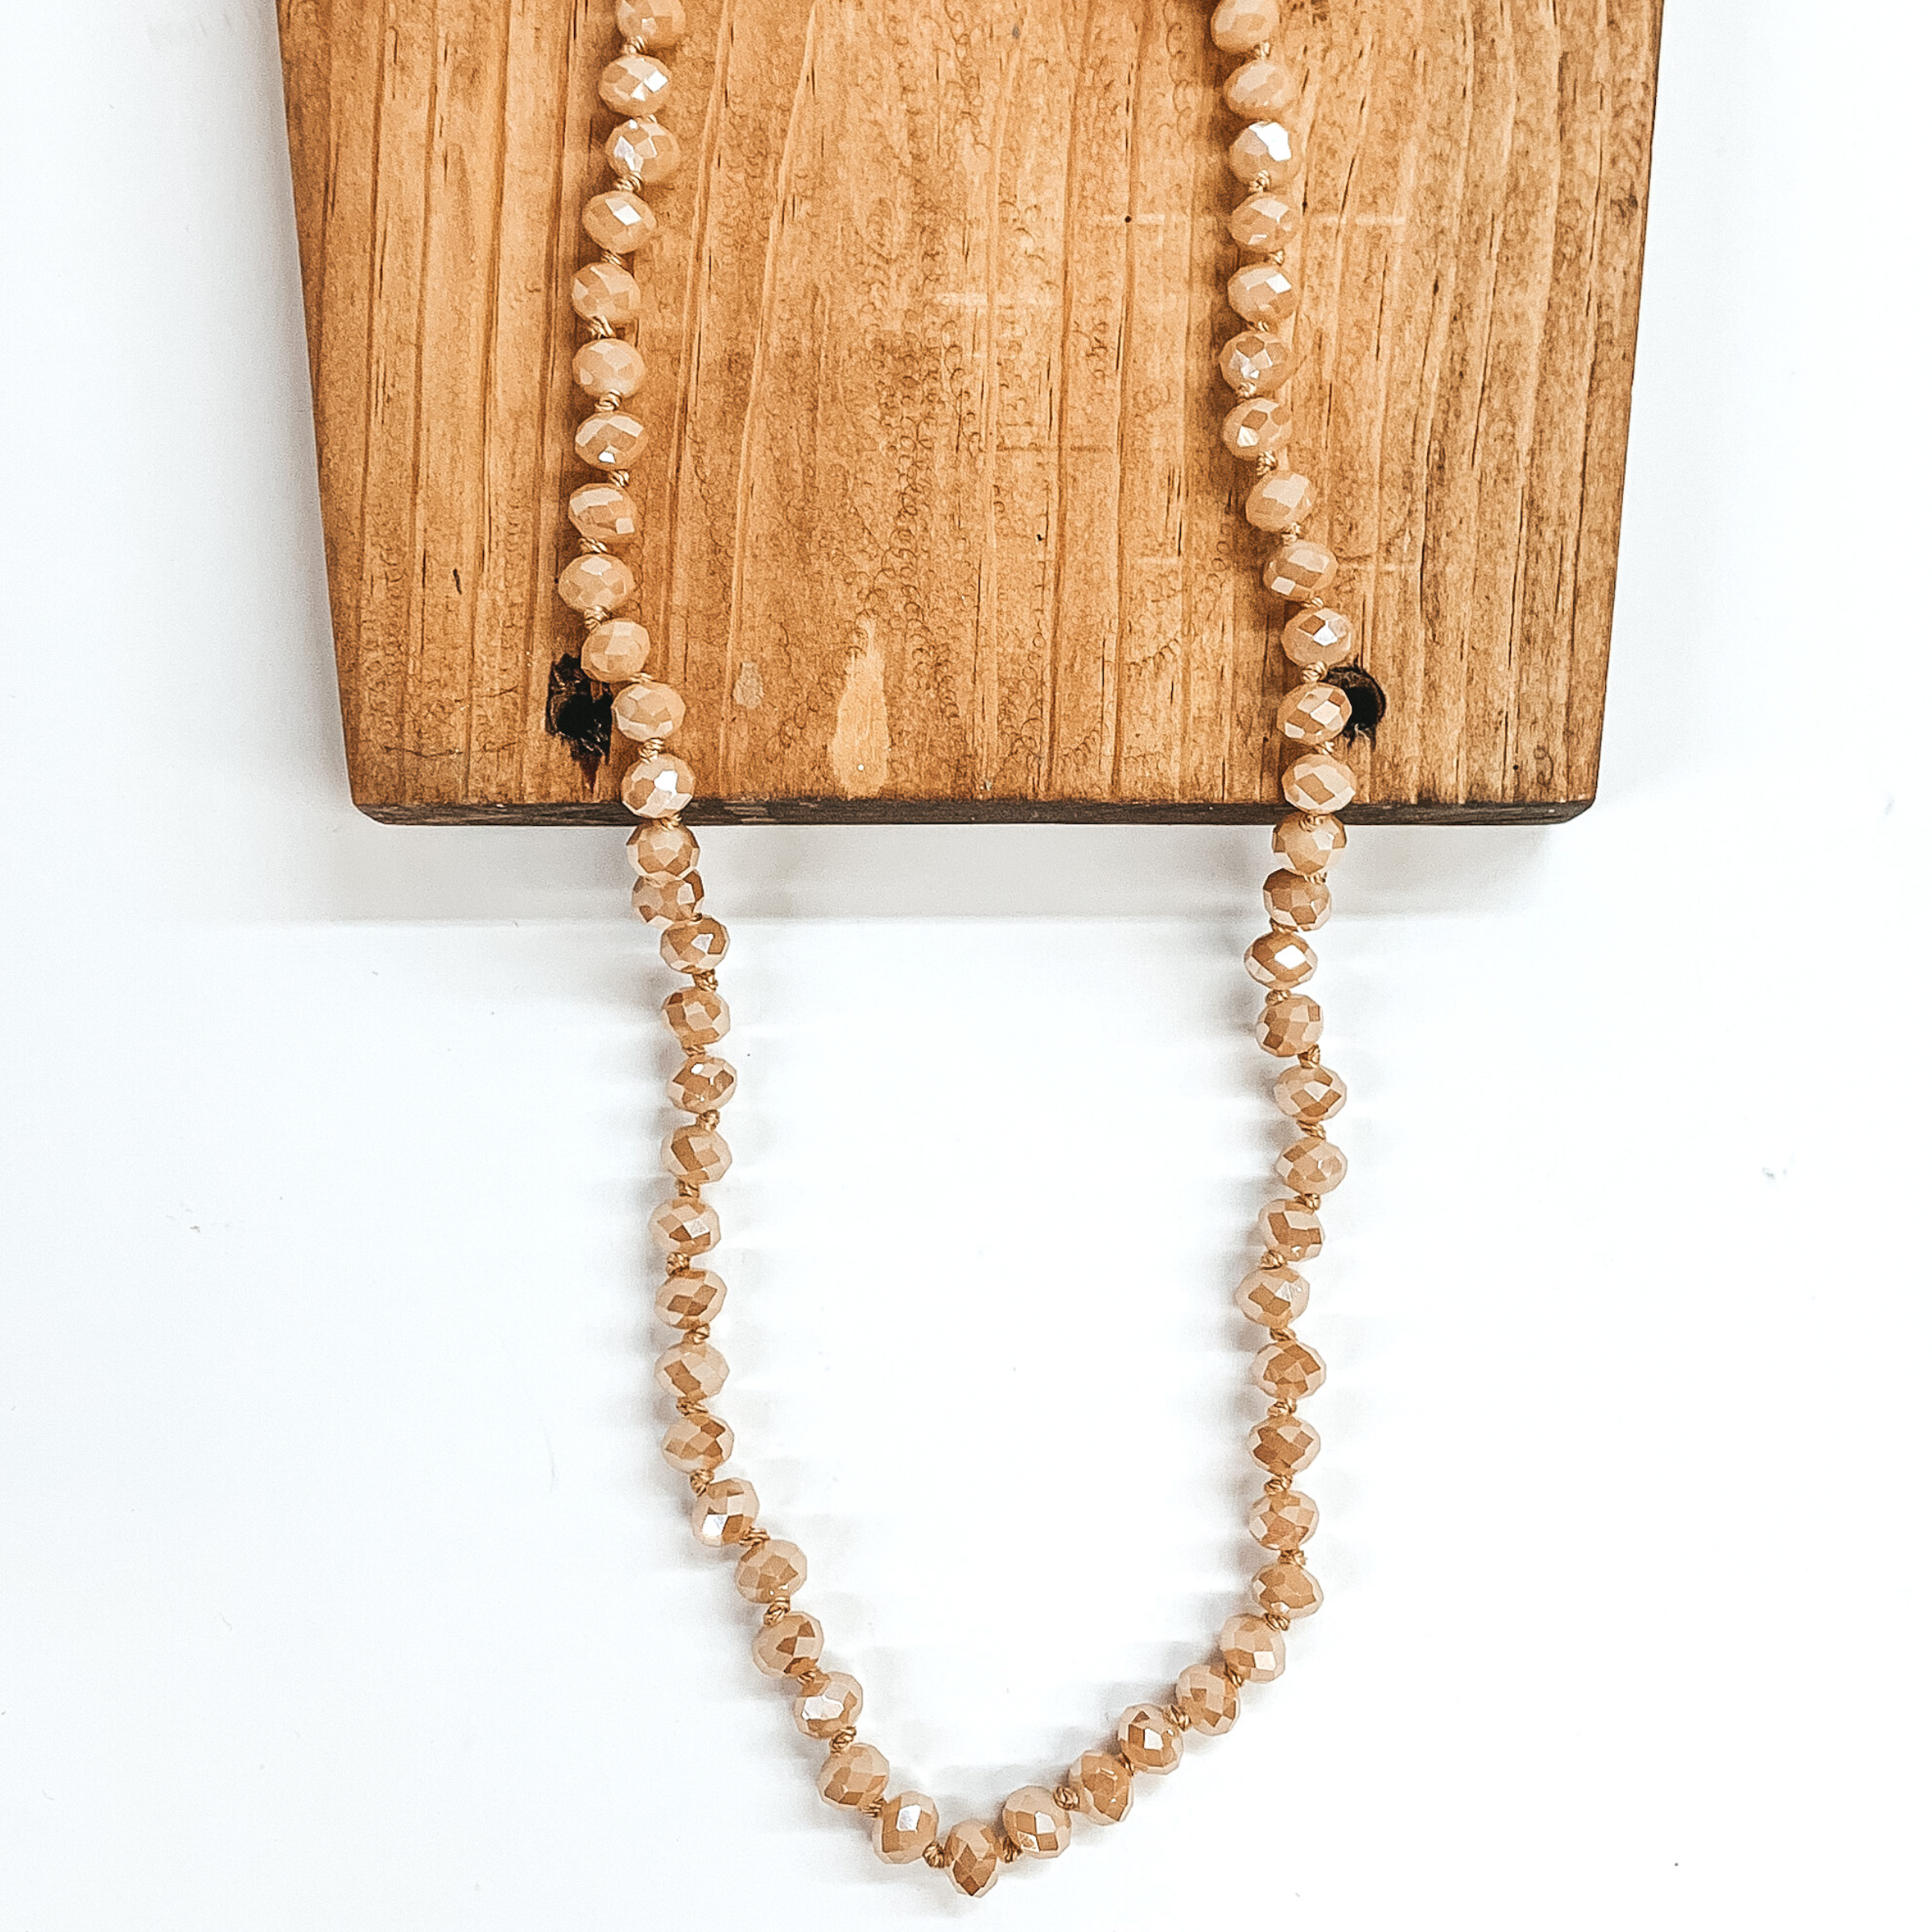 Sand colored crystal beaded necklace. This necklace is pictured on a brown block on a white background.